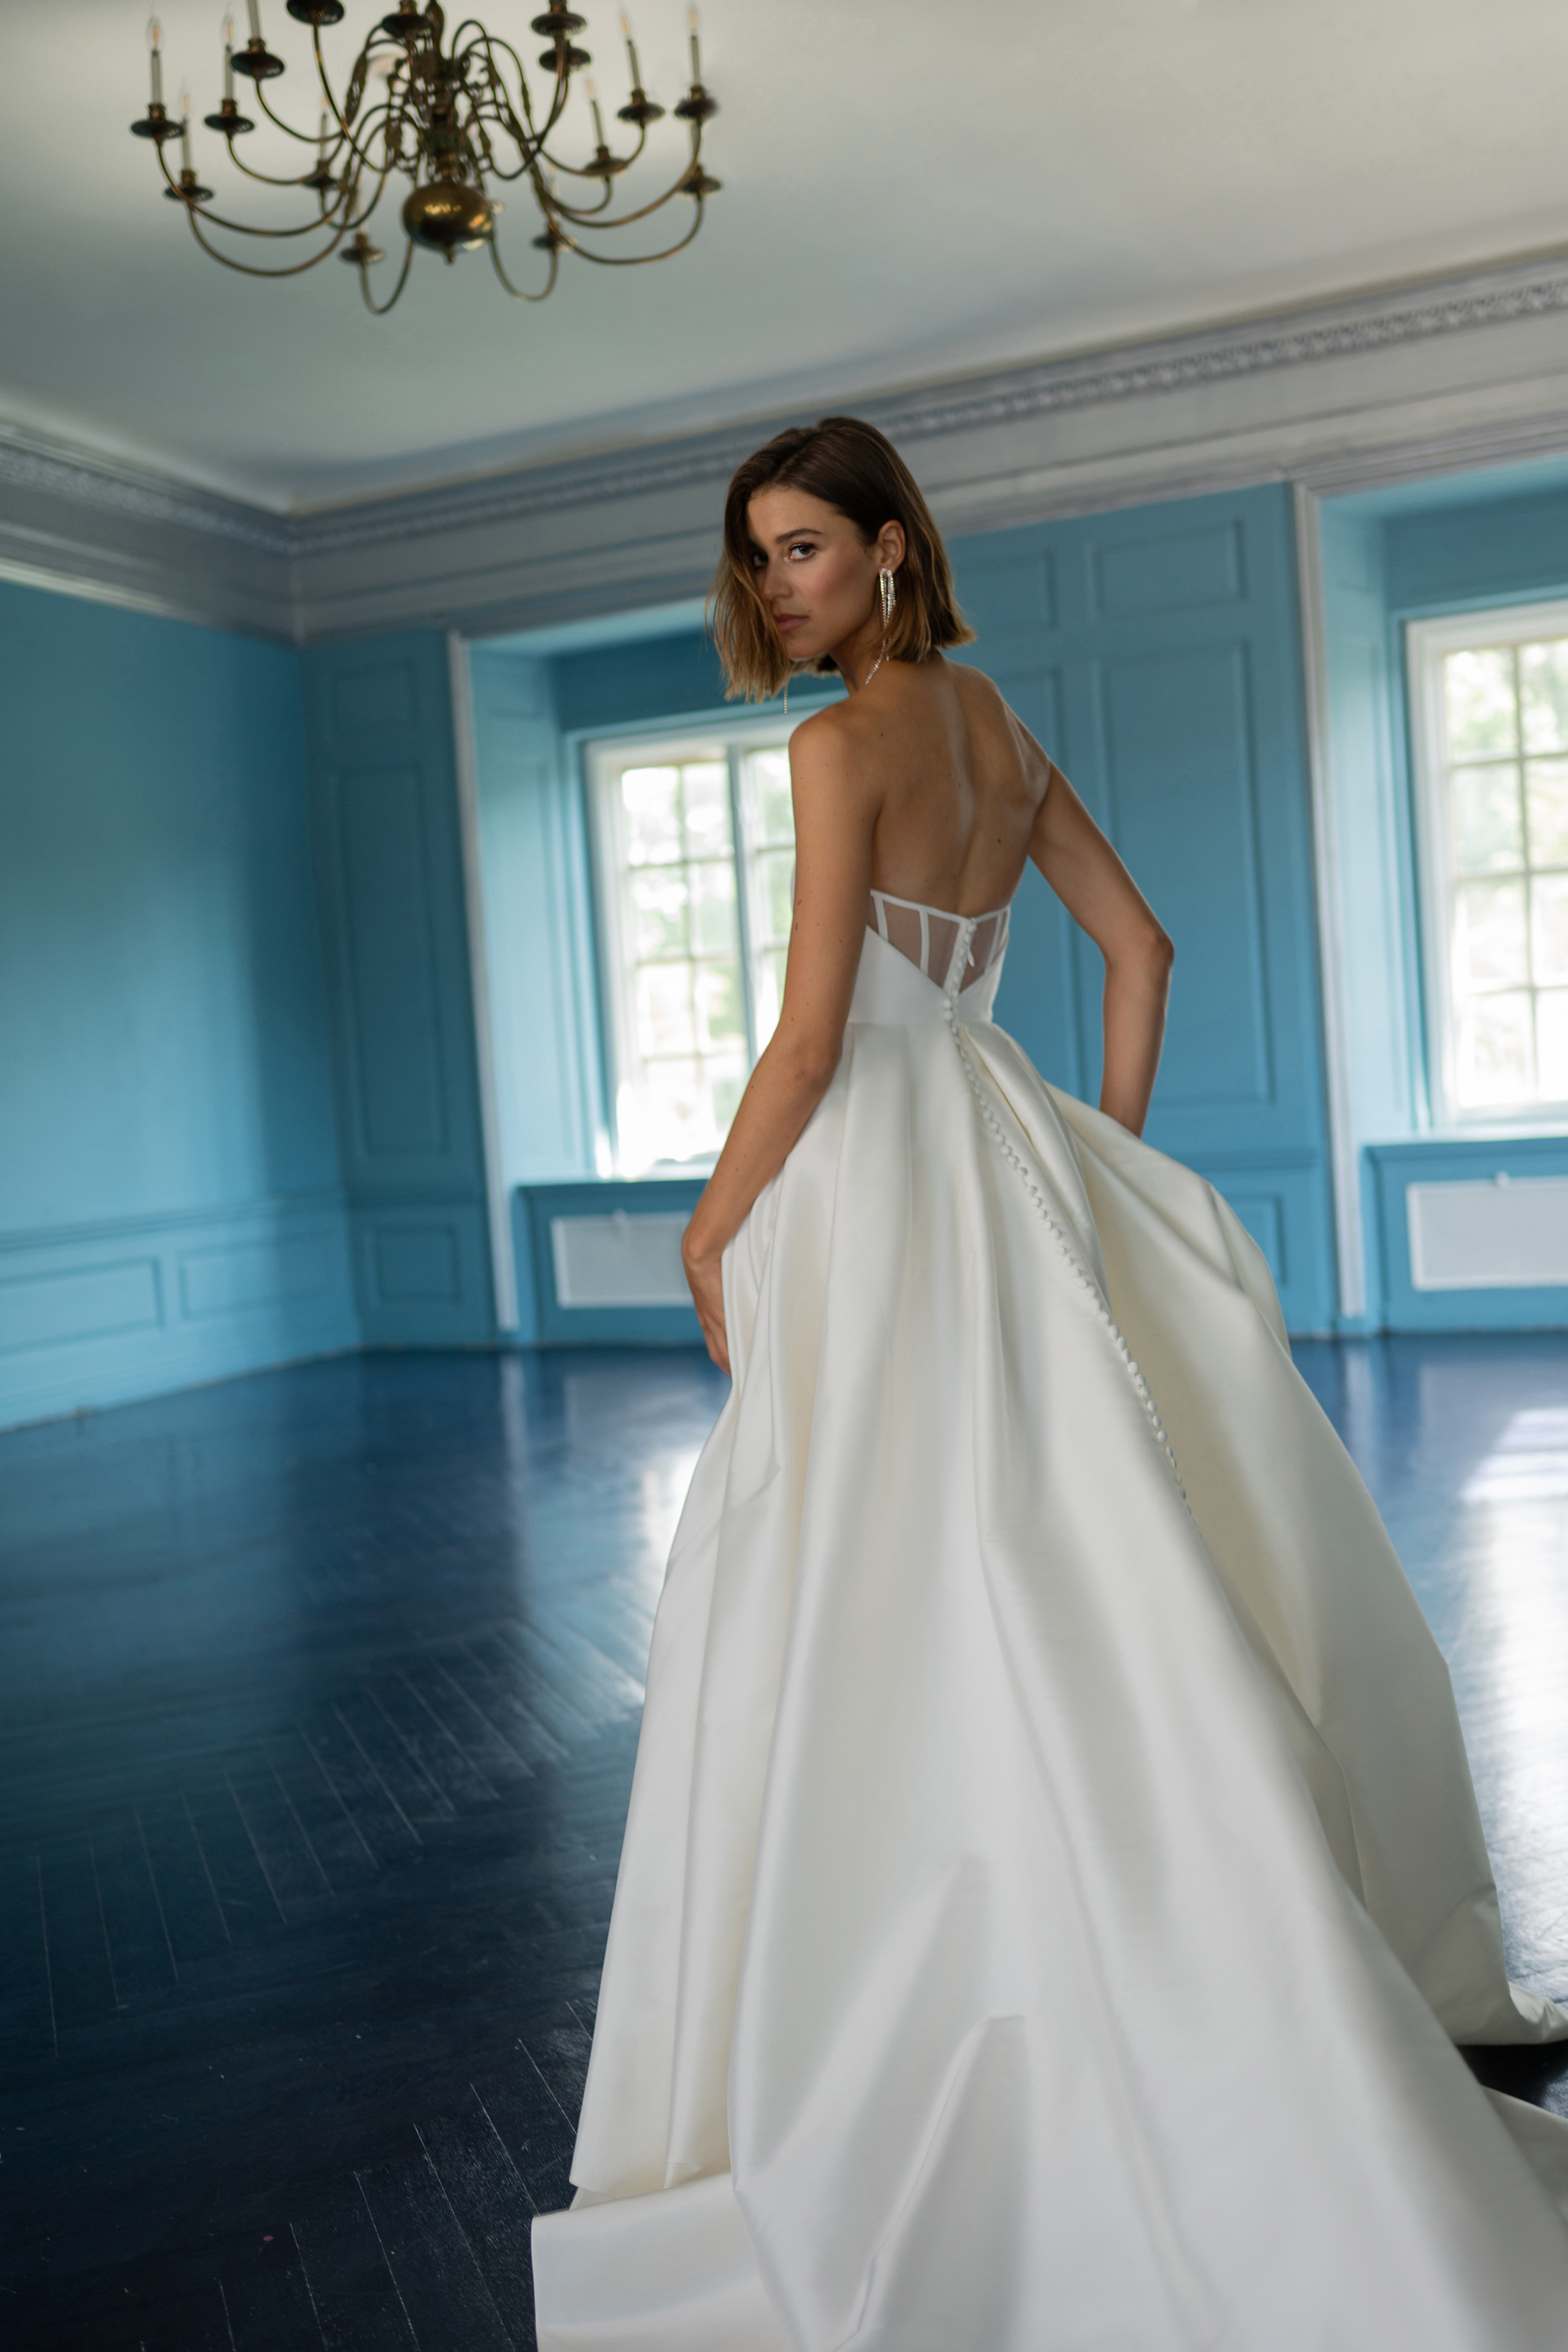 Top Five Wedding Dresses for the Petite Modern Bride